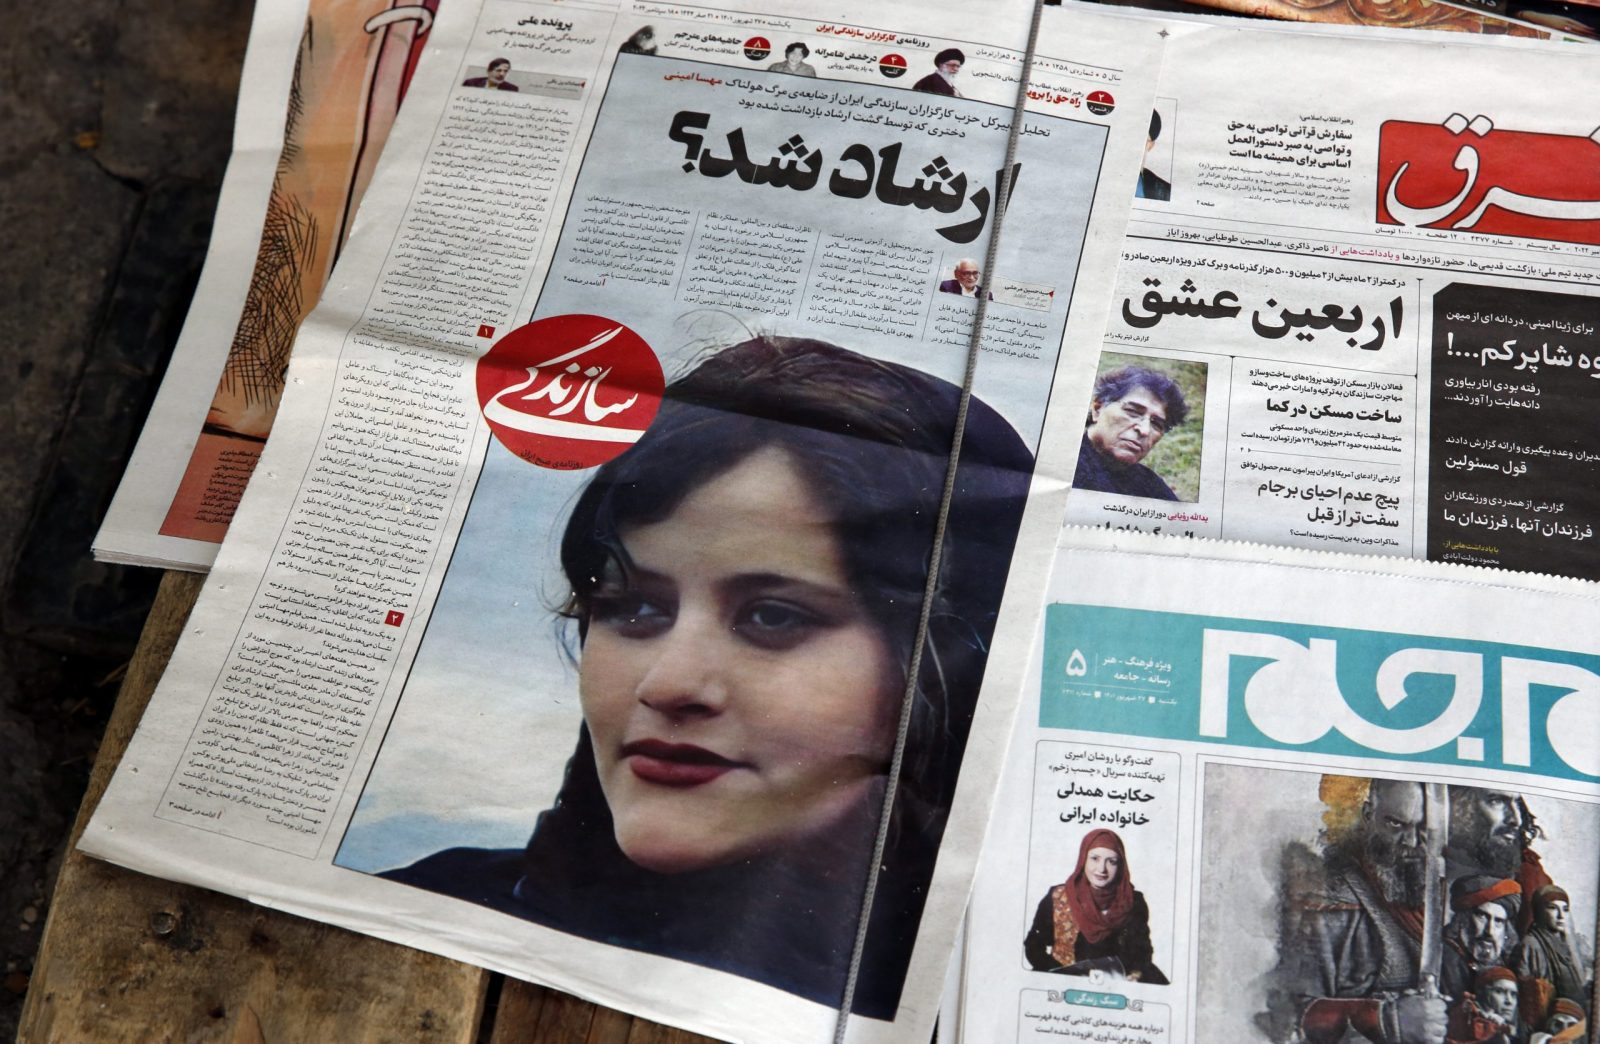 epa10191412 Iranian daily newspapers reporting Mahsa Amini’s death, in Tehran, Iran, 18 September 2022. Mahsa Amini, a 22 year old girl, was detained on 13 September by the police unit responsible for enforcing Iran's strict dress code for women. Amini was declared dead on 16 September, after she spent 3 days in a coma. Protests broke out in Saqez, hometown of Amini during her funeral on 17 September.  EPA/ABEDIN TAHERKENAREH